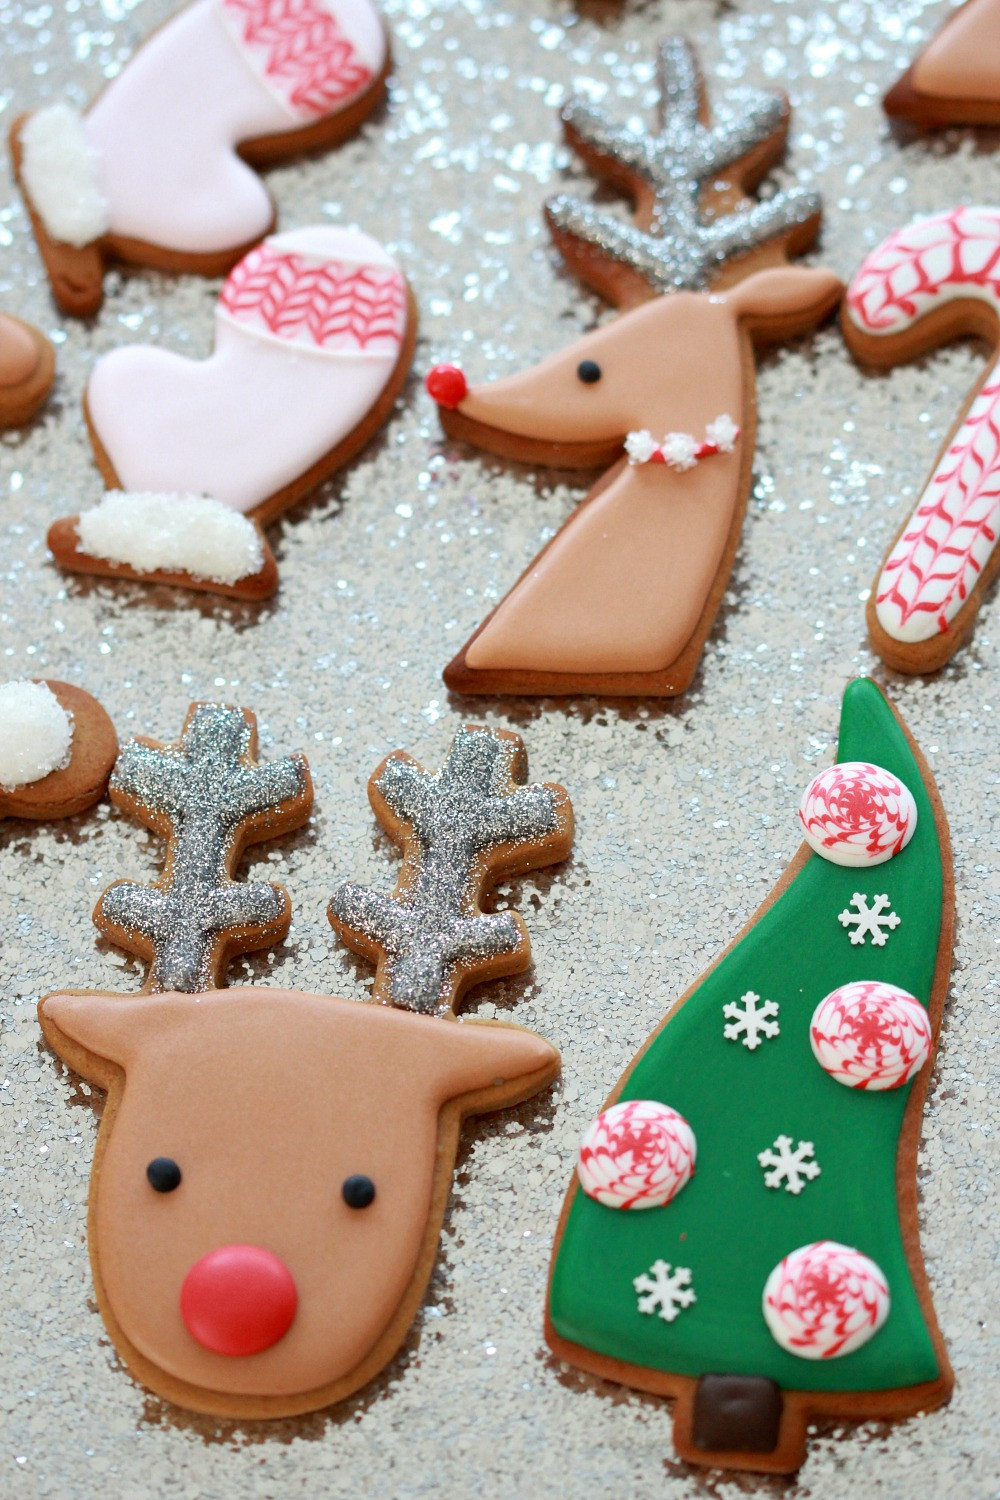 Decorated Christmas Cookies
 Video How to Decorate Christmas Cookies Simple Designs